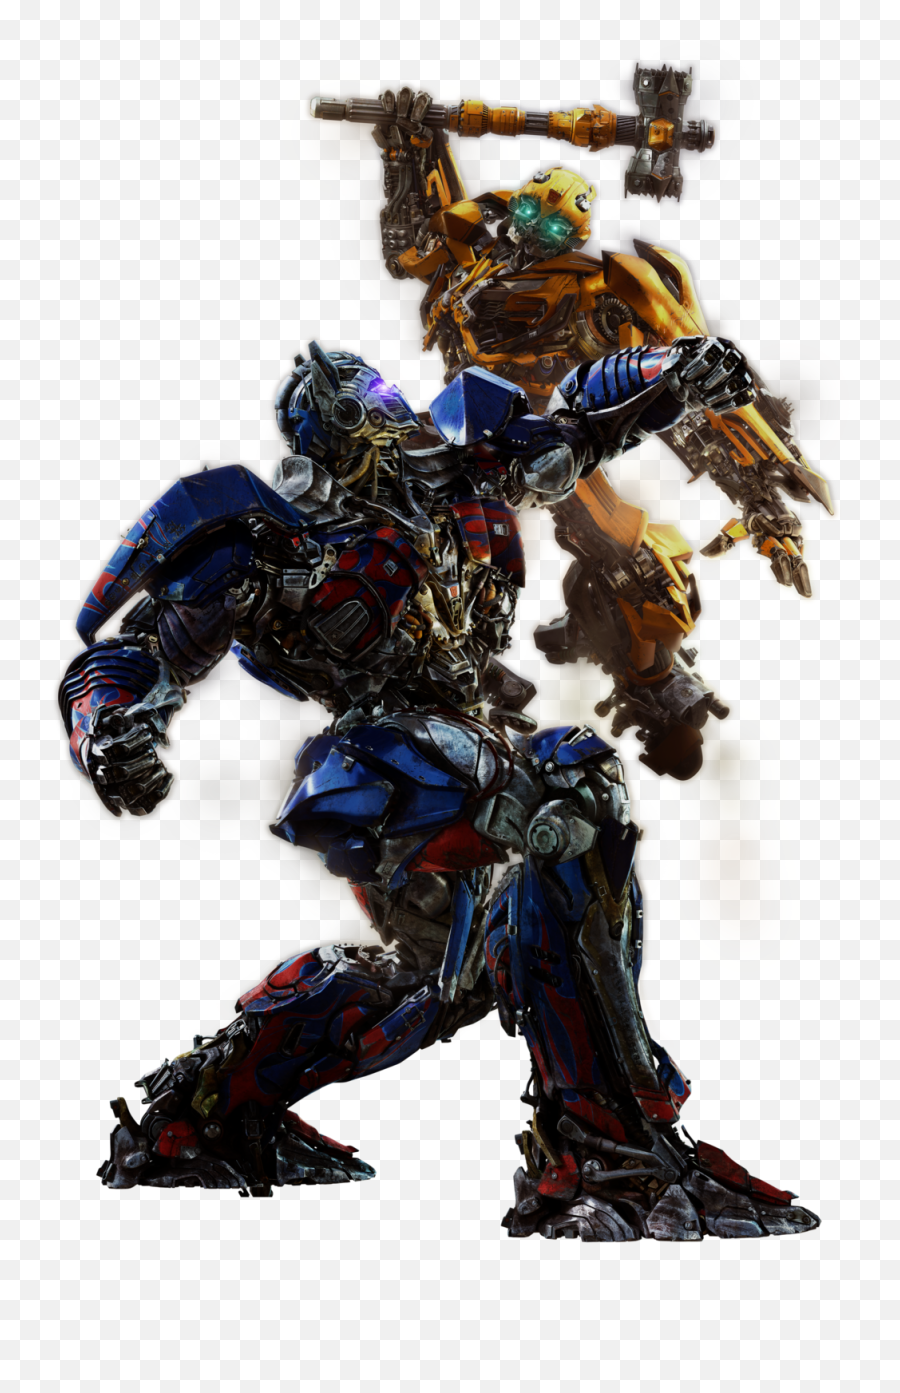 Optimus Prime Hound Transformers - Transformers The Last Knight Optimus Prime Vs Bumblebee Png,Bumblebee Png